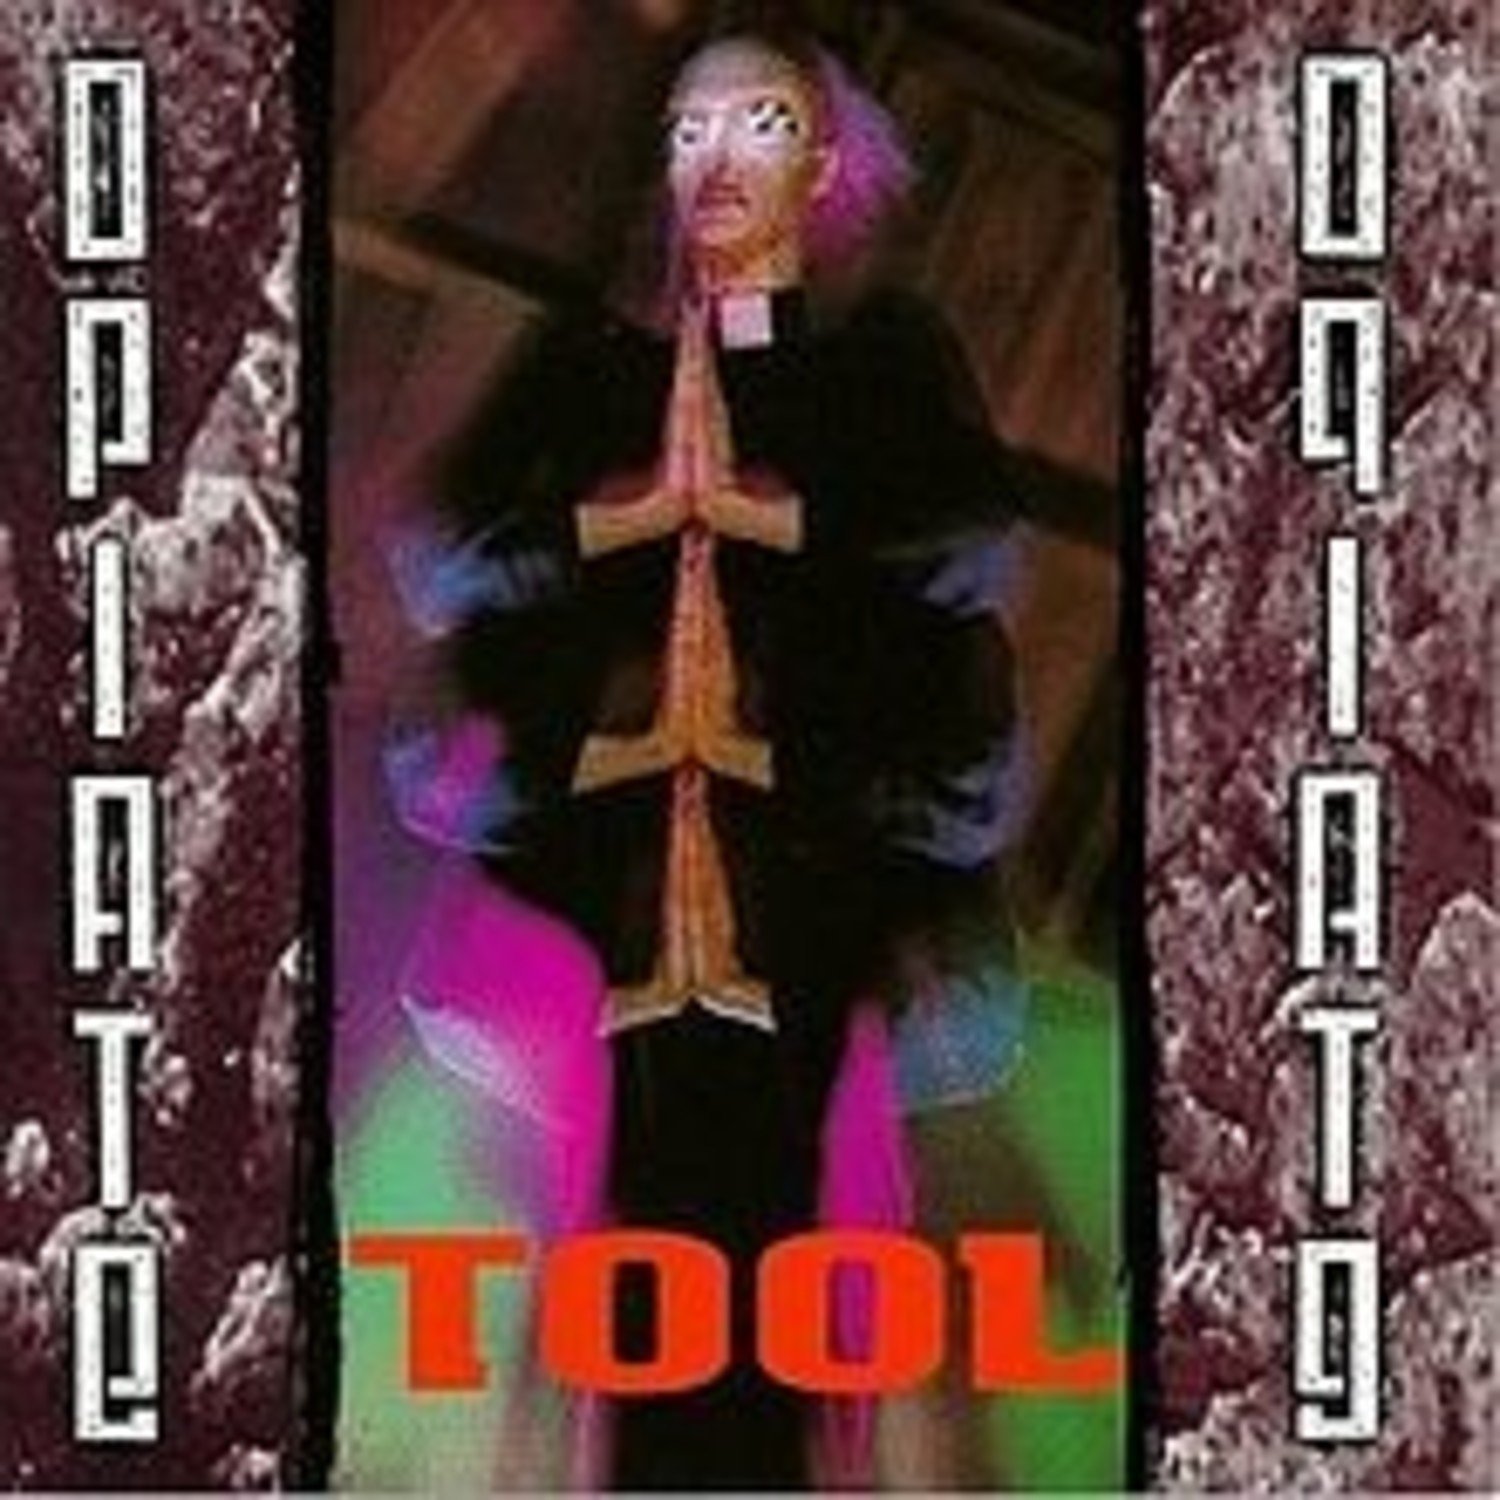 Tool - Opiate (ep) LP - Wax Trax Records